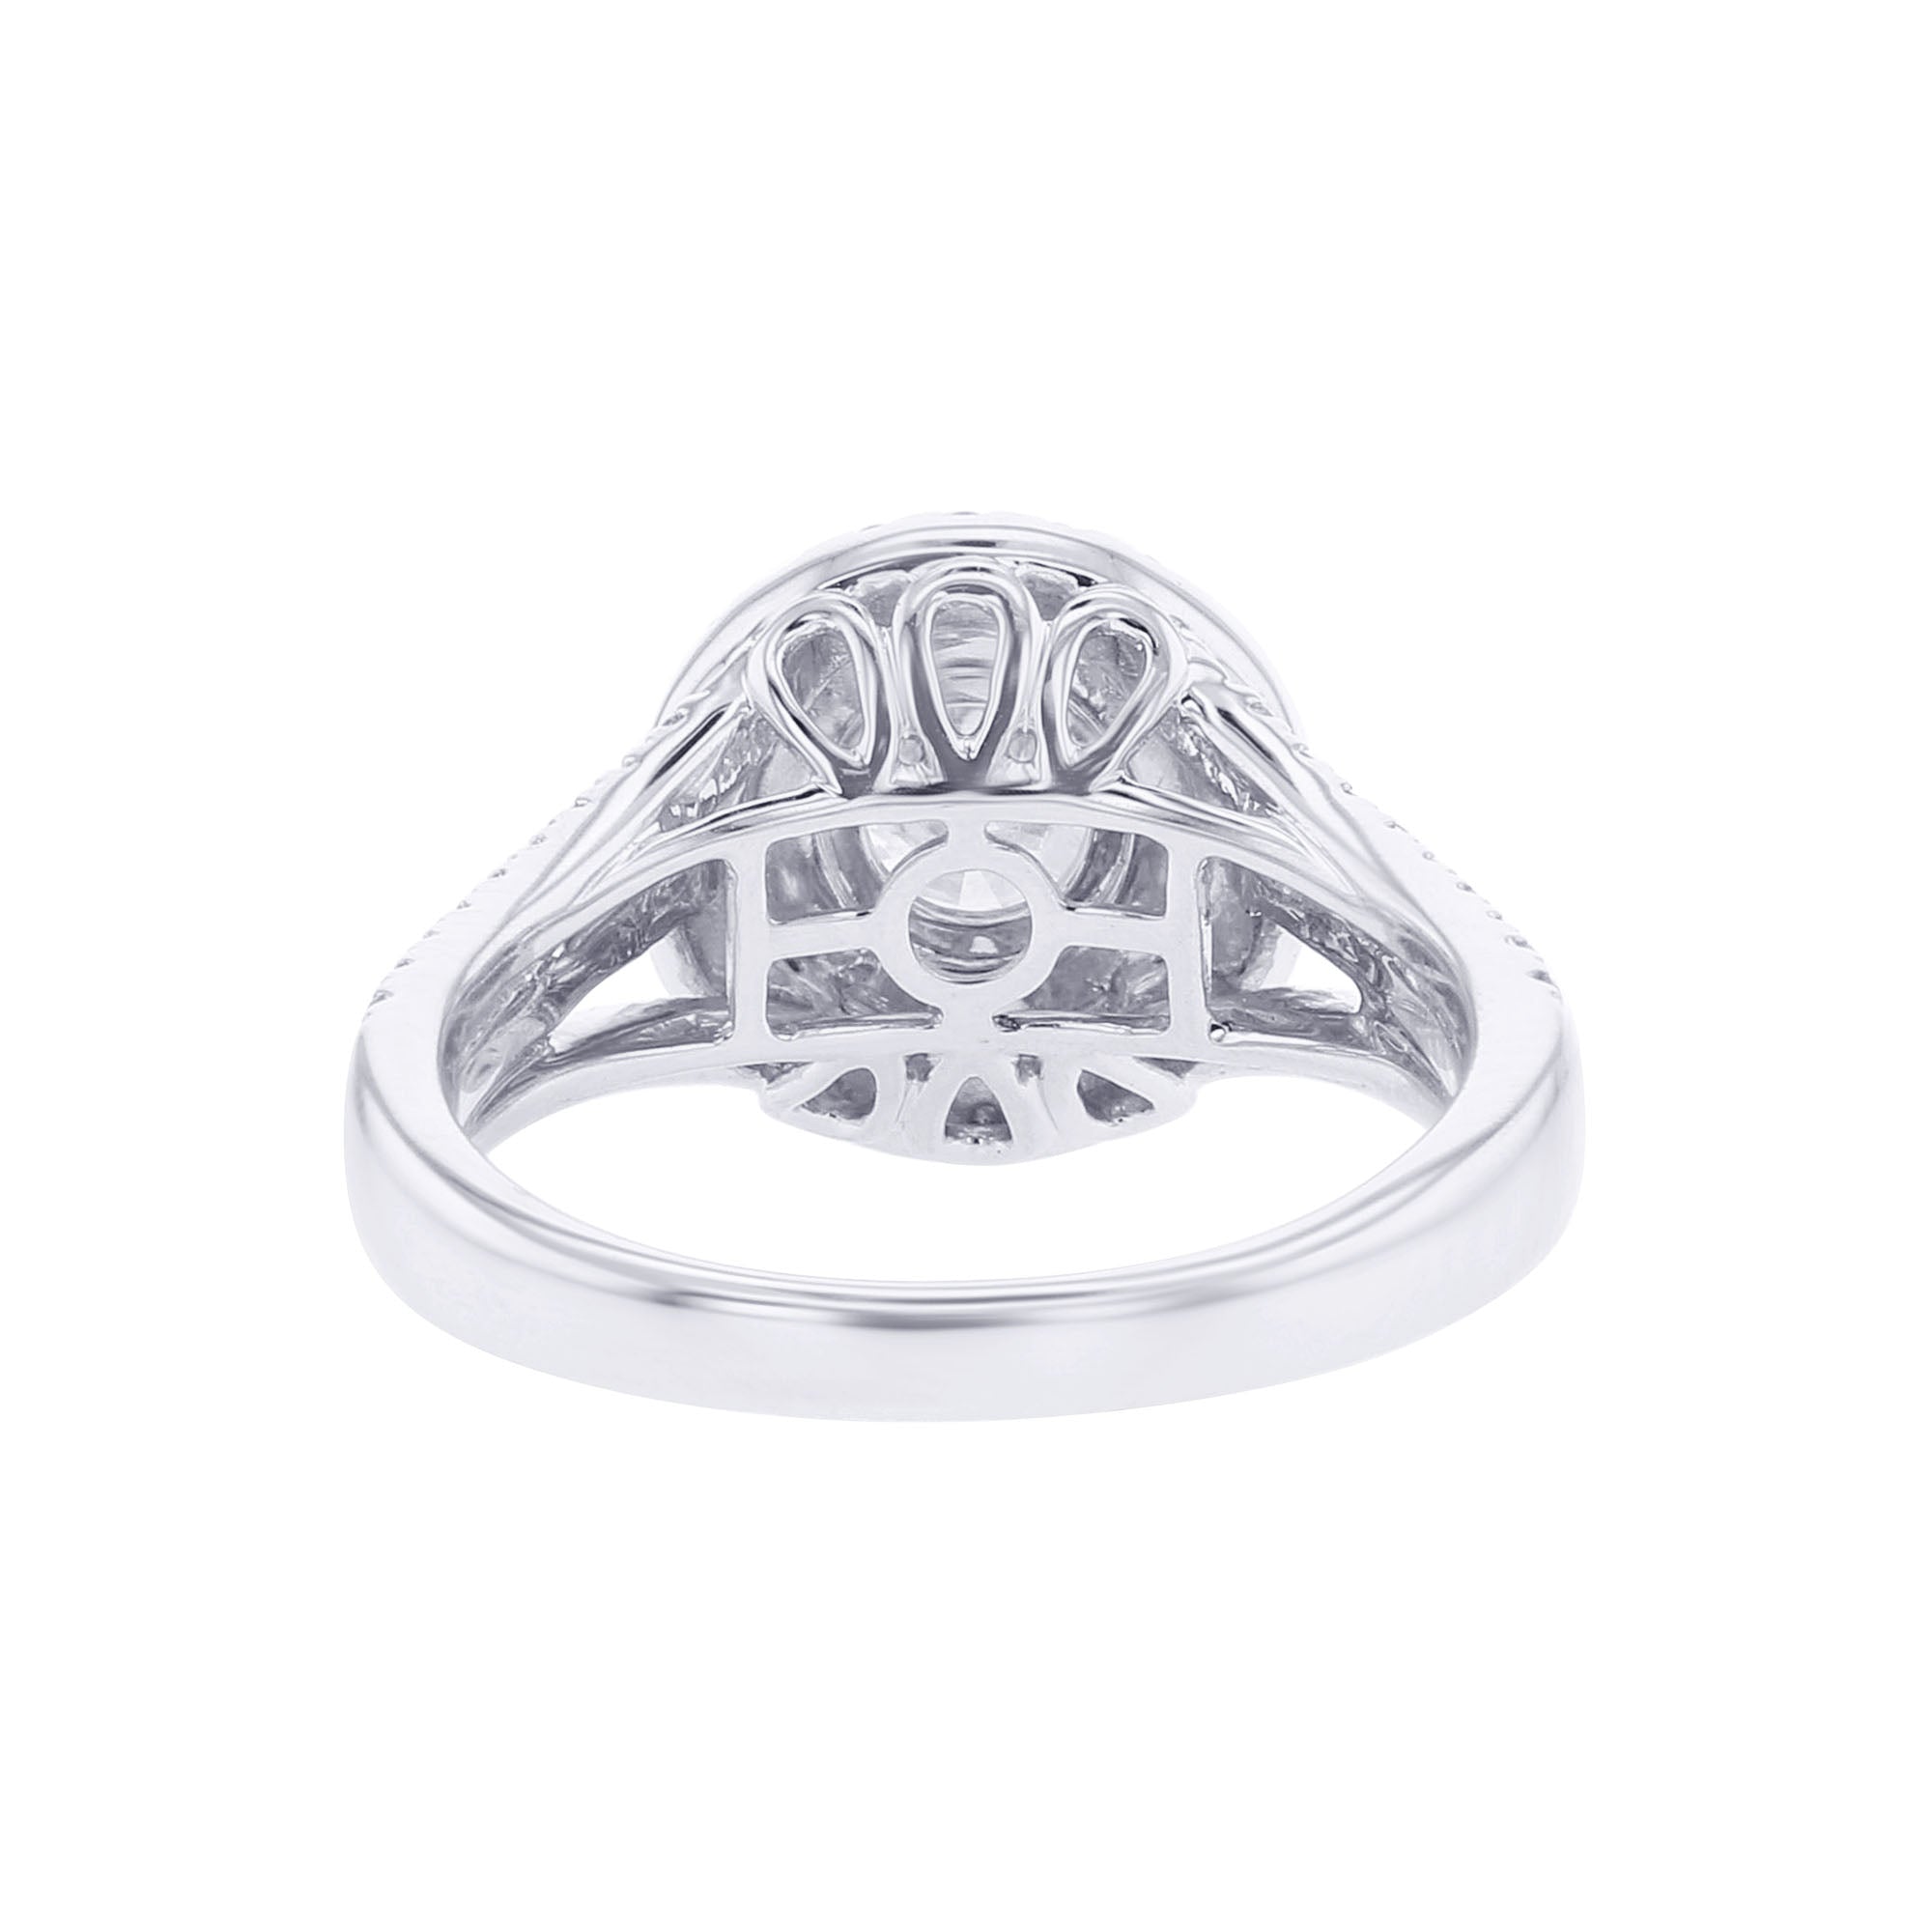 Millie Round Double Halo Ready for Love Diamond Engagement Ring